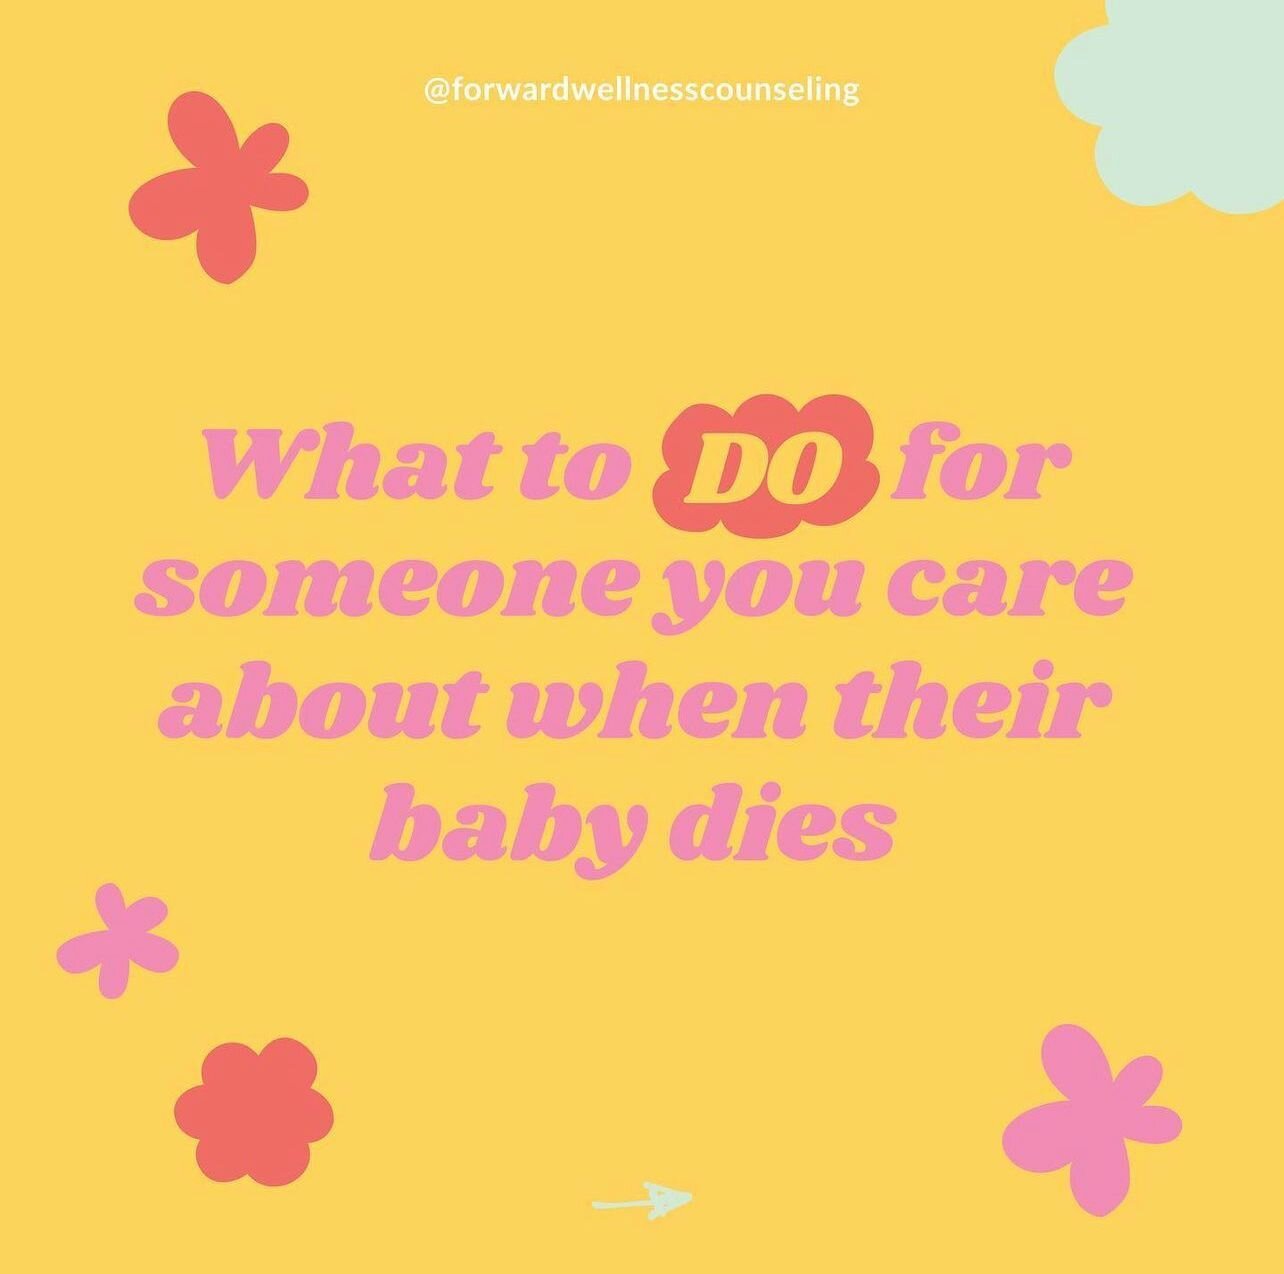 It can be difficult to know how to support someone whose baby has died.

Many people struggle with knowing what will actually help and what will only cause more harm.

We pulled together some tips based on our own personal experiences, knowledge gain